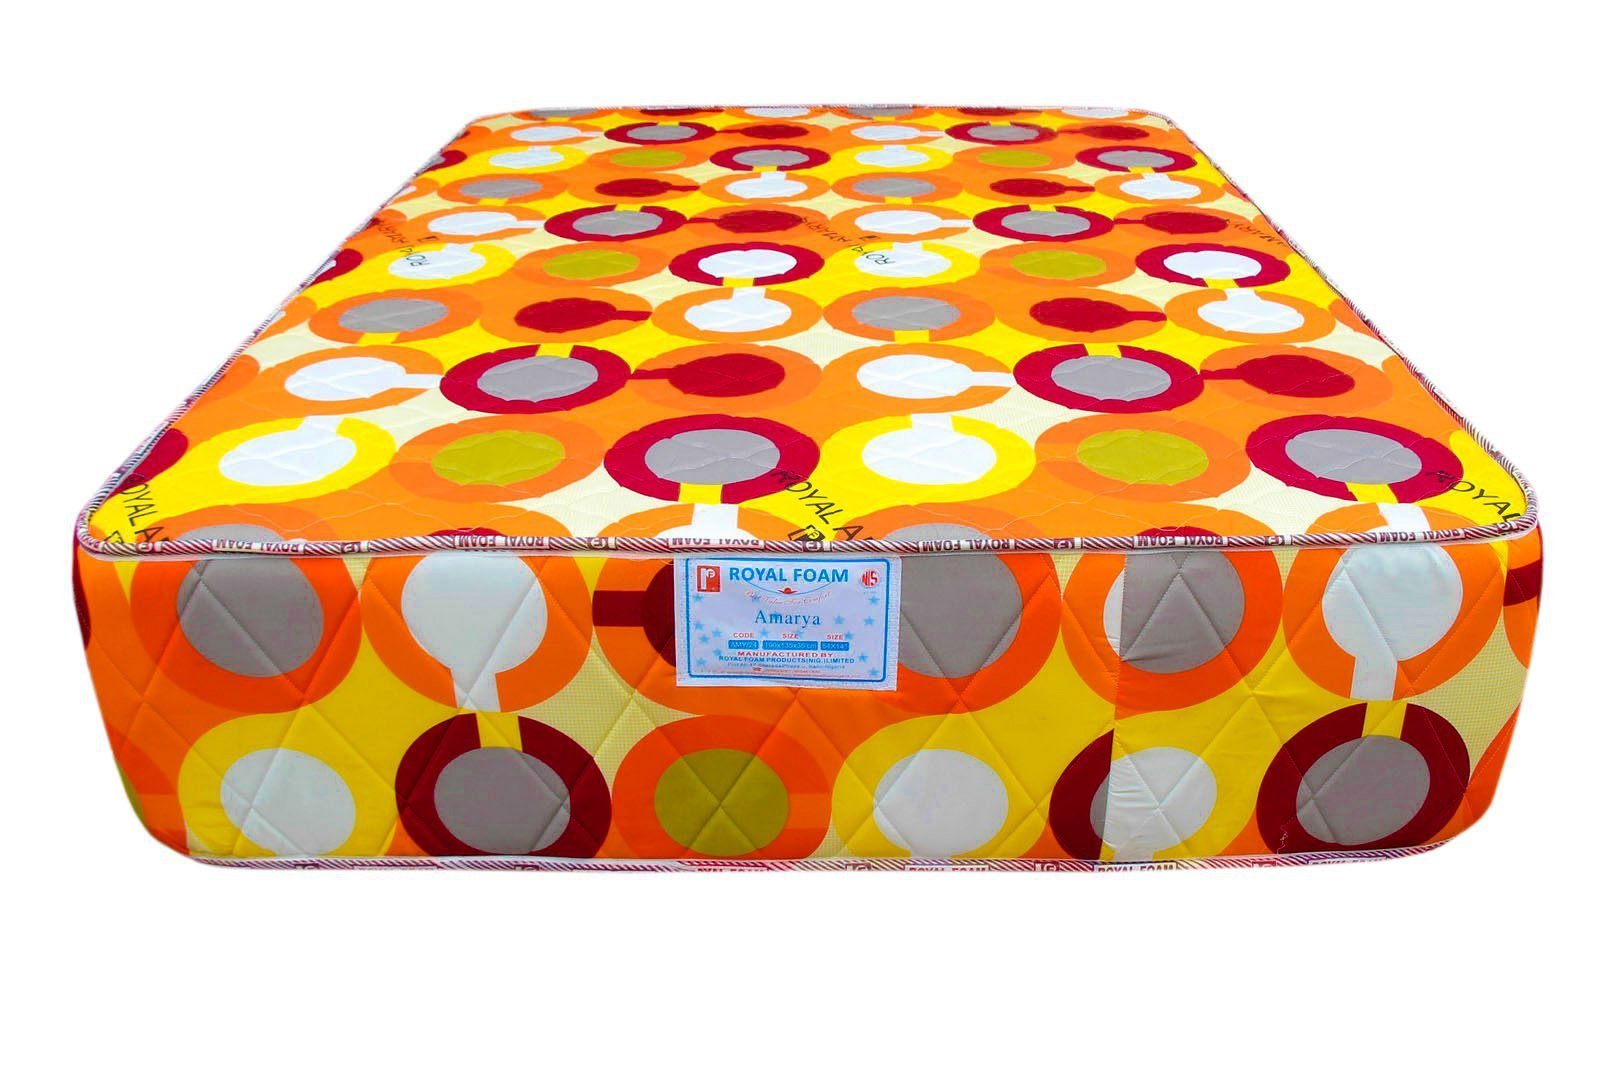 Royal Amarya-Poly Cotton Fabric - 14 Density foam - Fully Quilted Mattress -190X120X15CM [75 x 48 x 6"] [6ft x 4ft x 6inches]